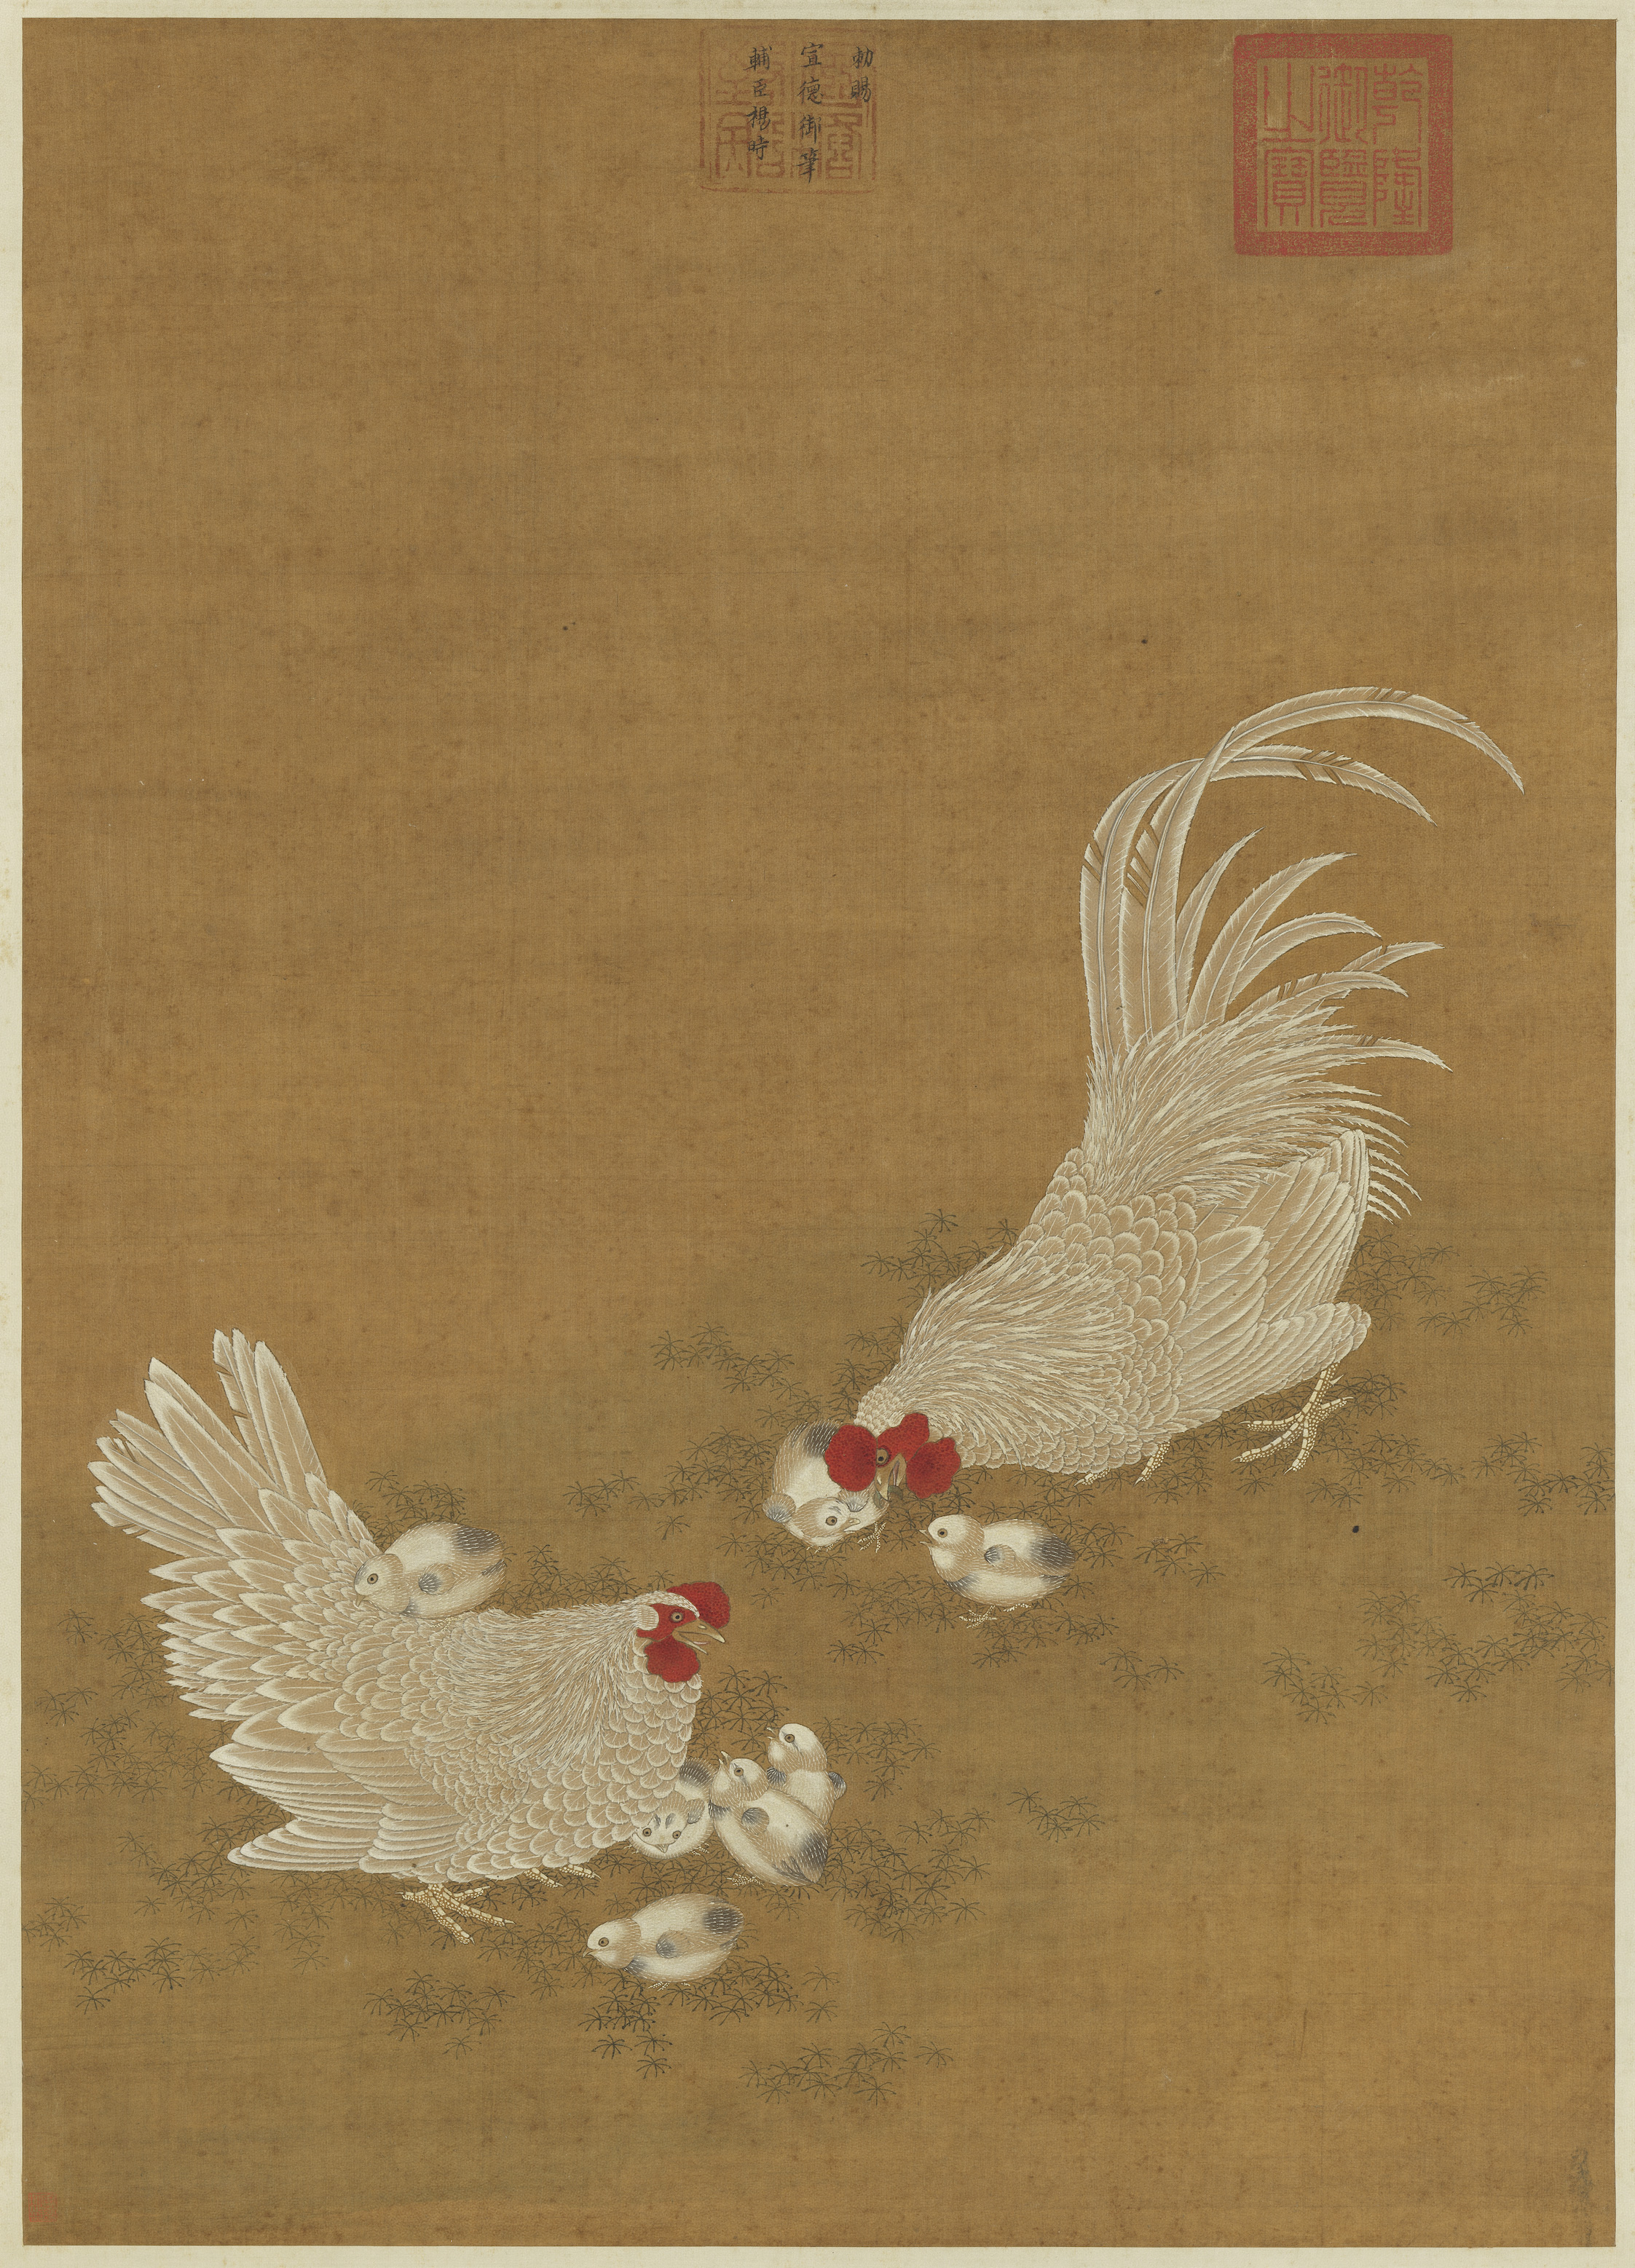 Hen and Rooster with Chicks